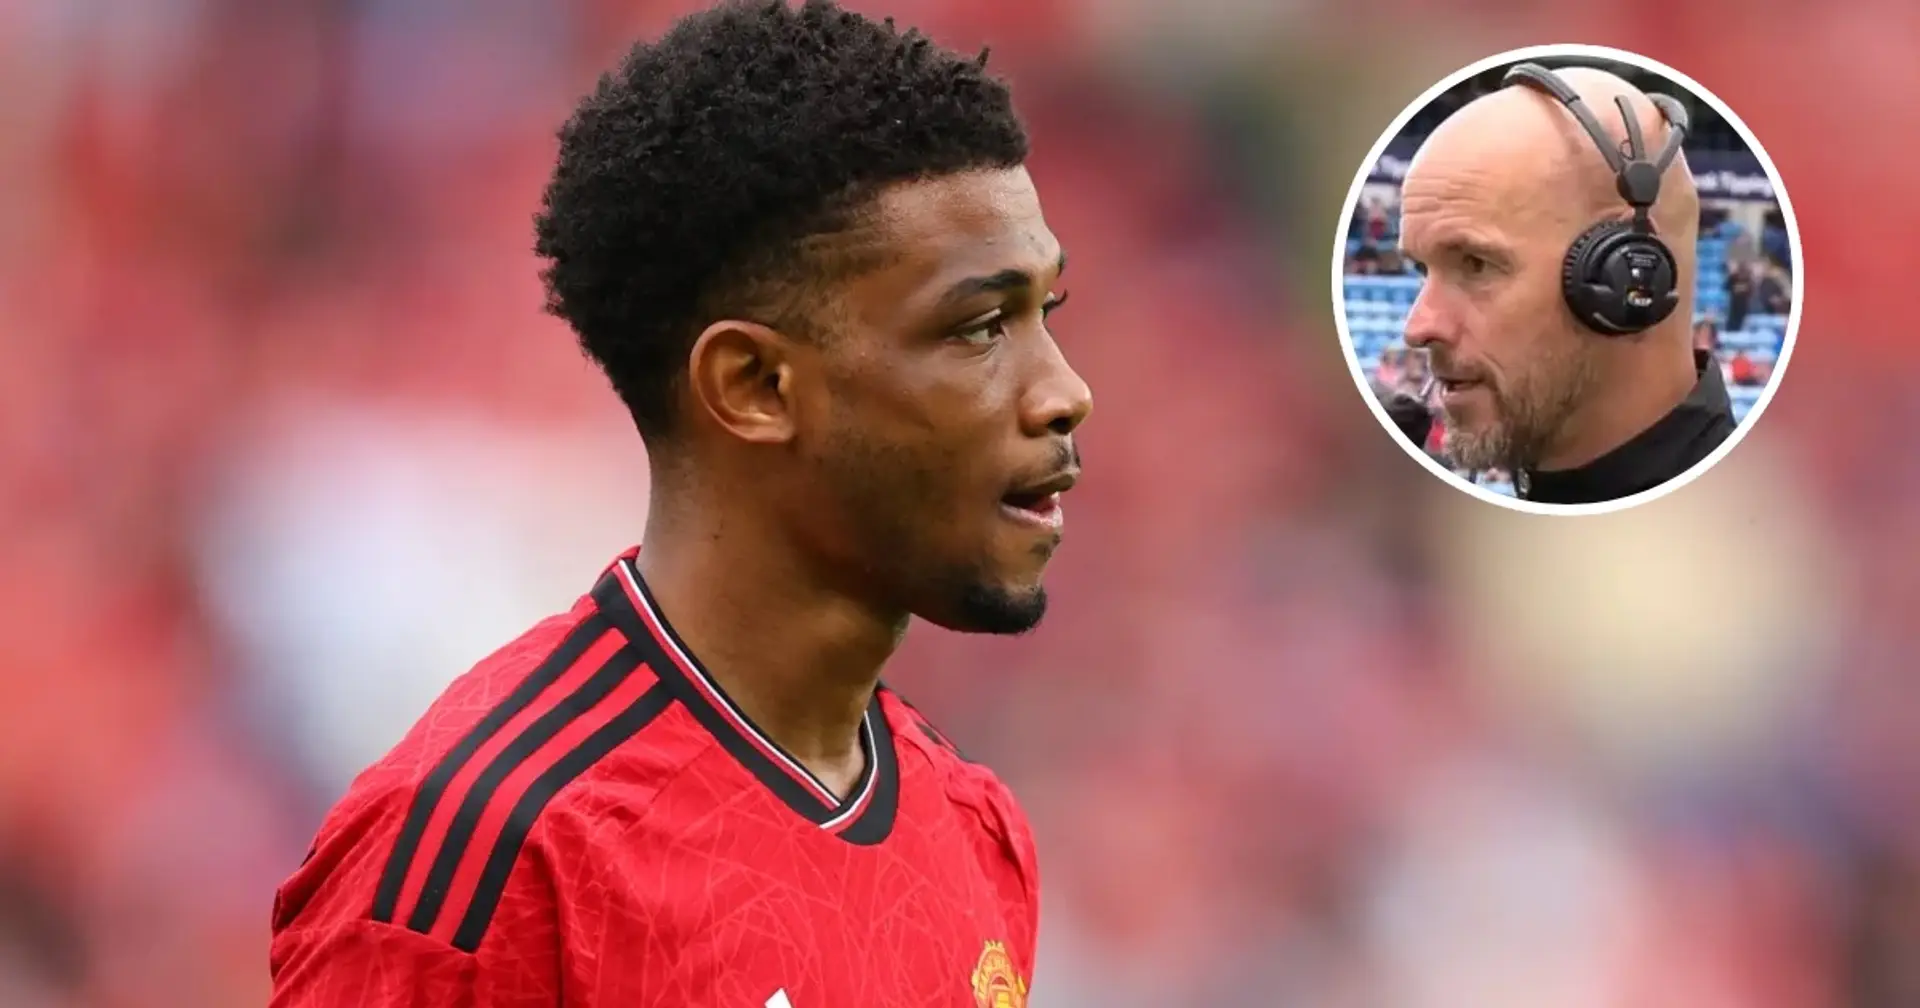 Ten Hag on Amad's Man United future: 'You don't make conclusions after one week'